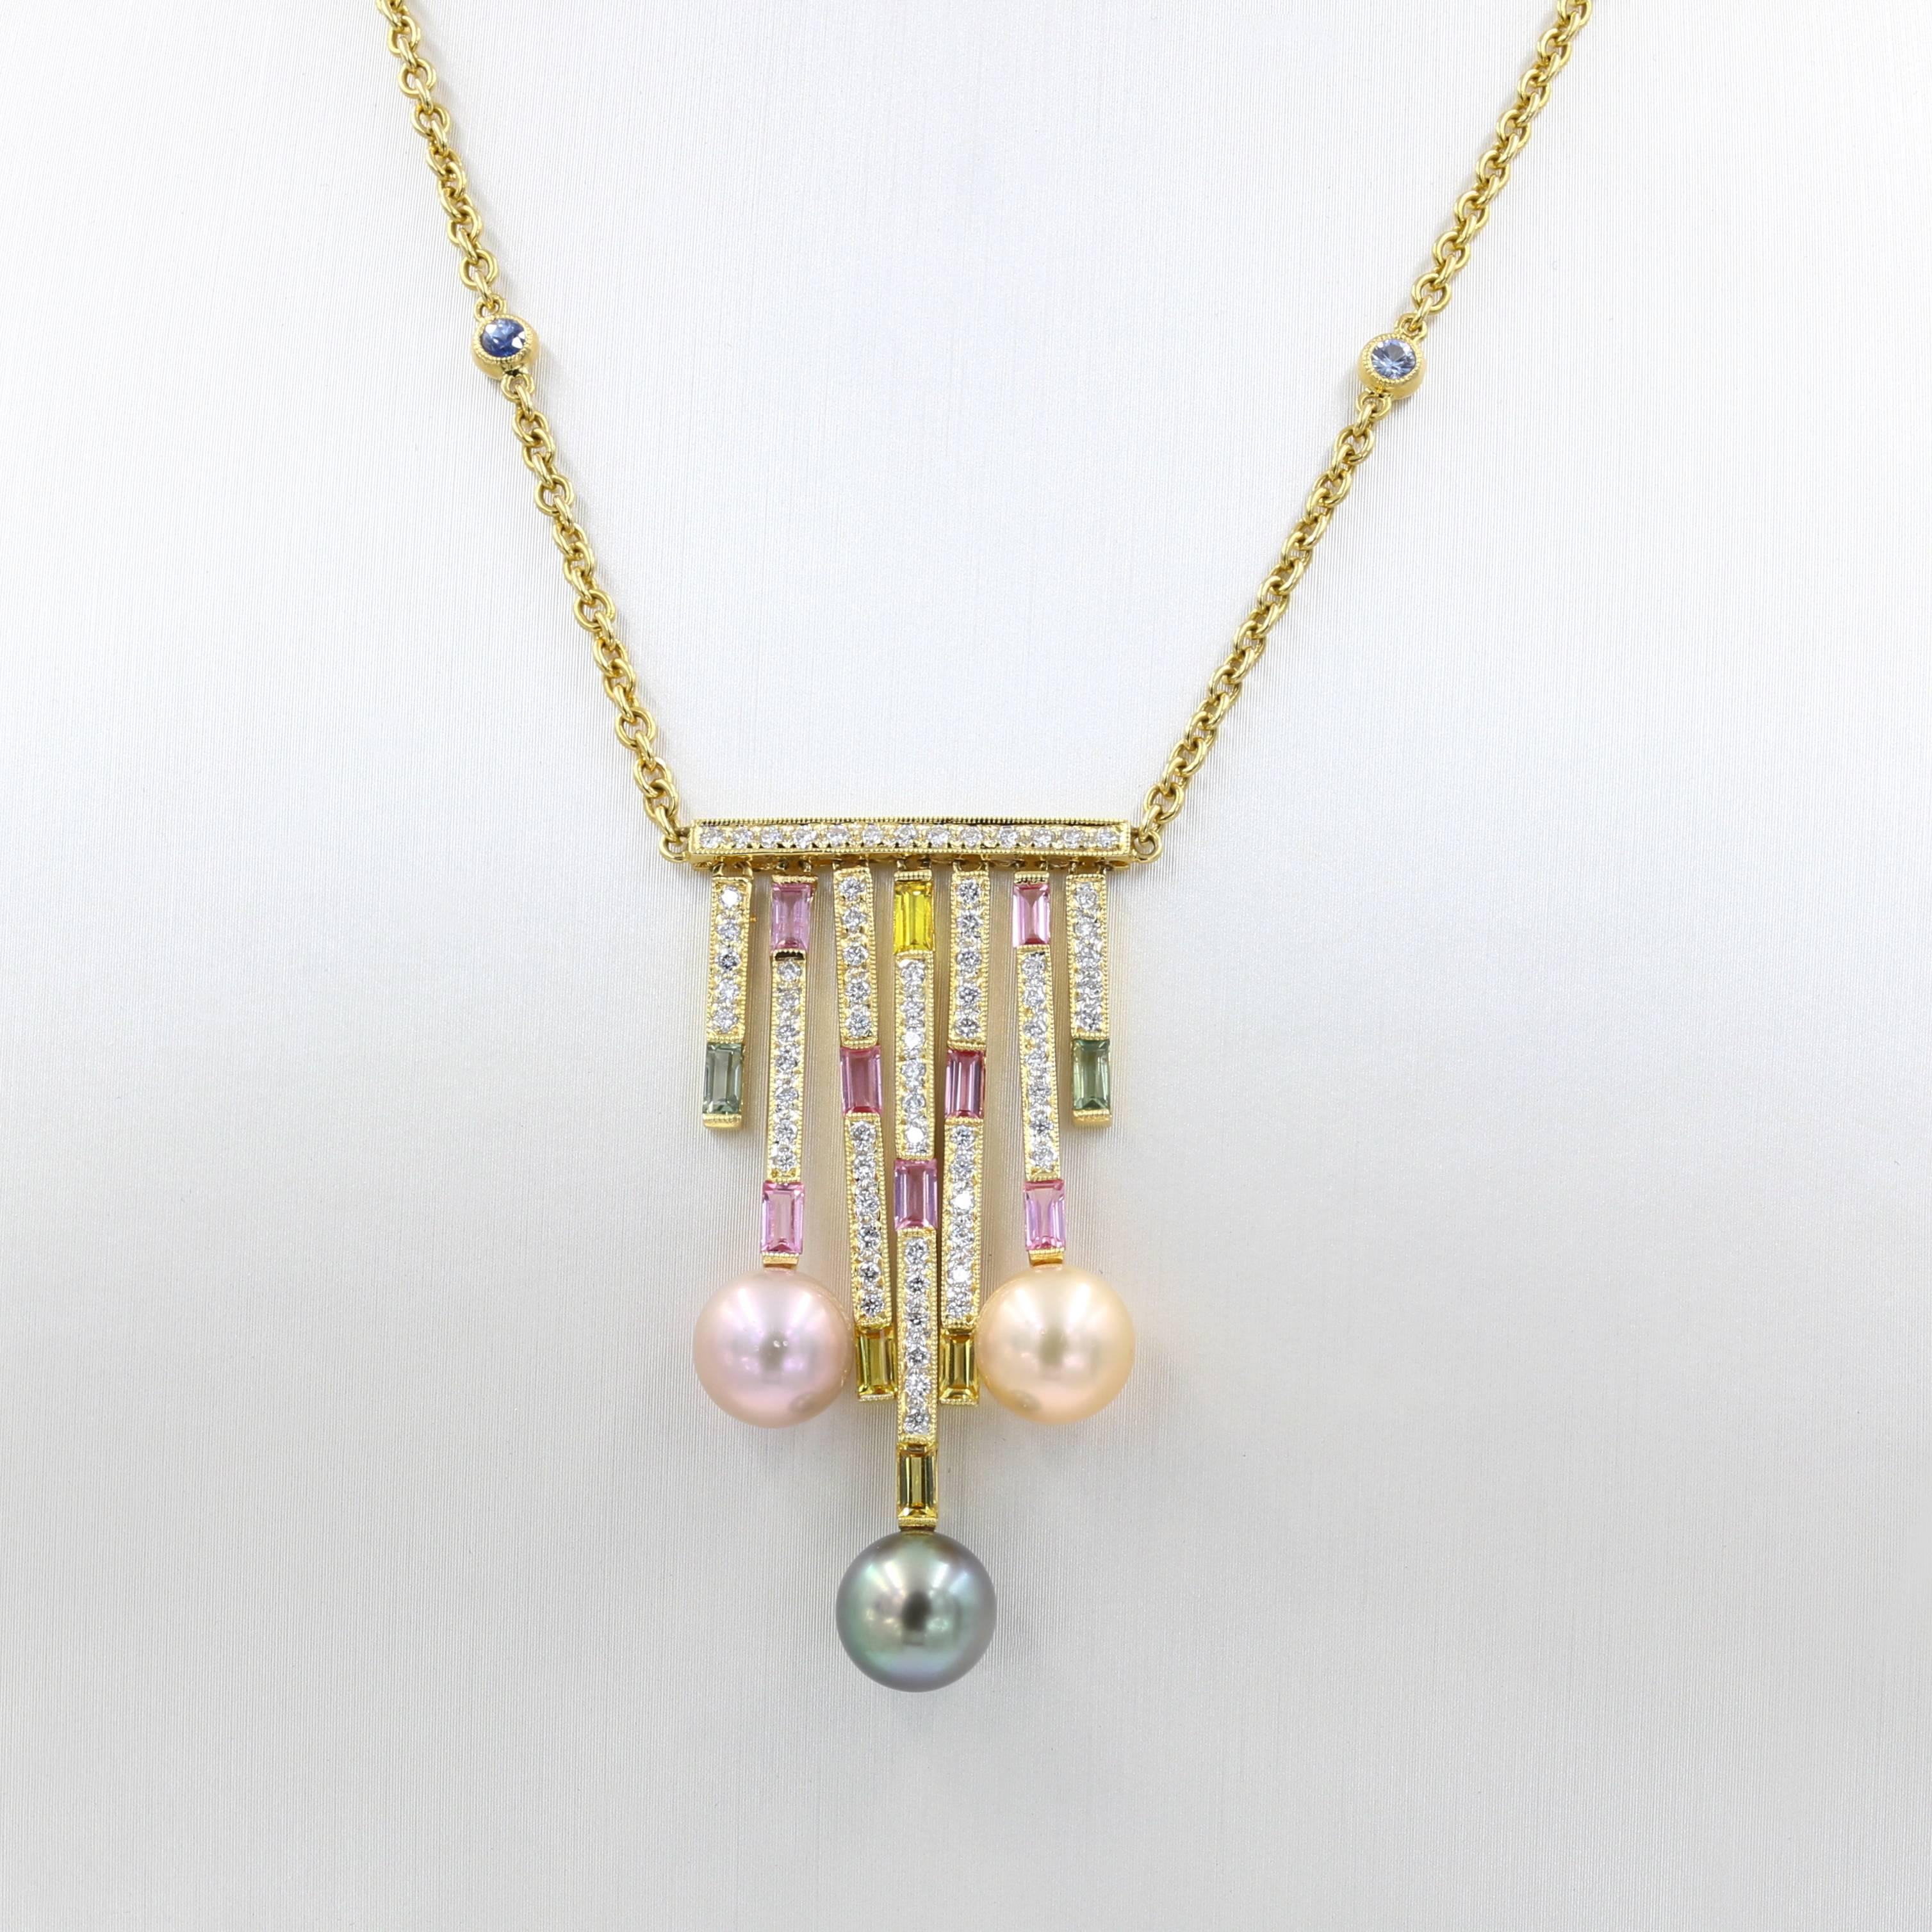 Contemporary Multi-Color Pearl, Colored Stone and Diamond Necklace in 18 Karat Yellow Gold